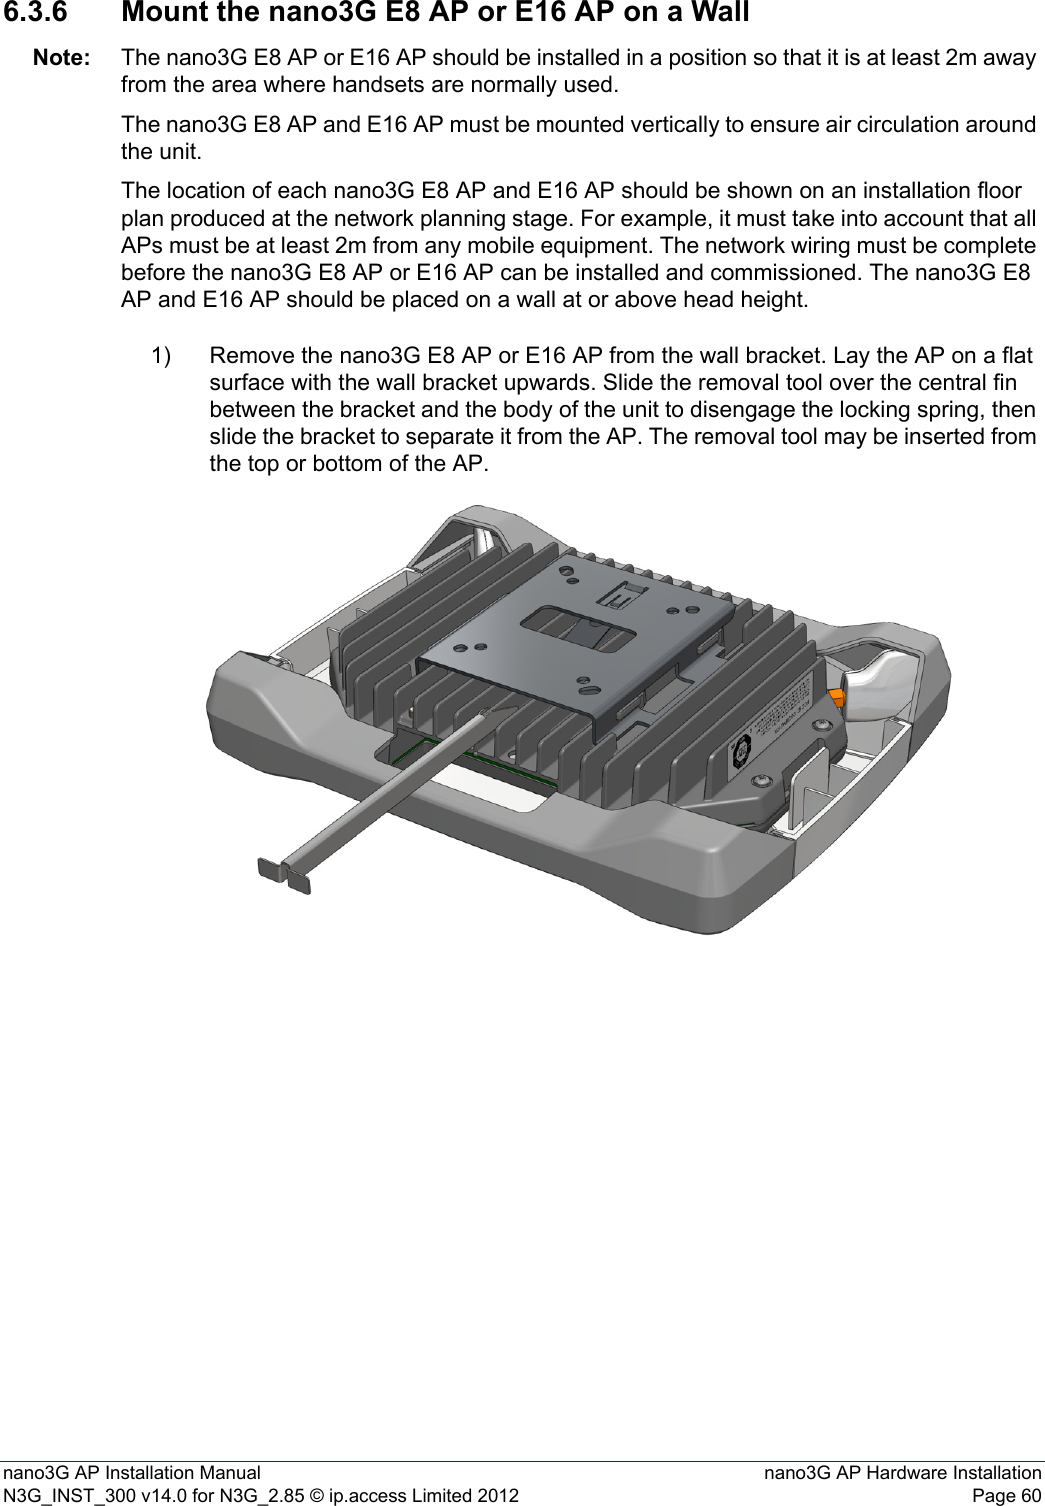 nano3G AP Installation Manual nano3G AP Hardware InstallationN3G_INST_300 v14.0 for N3G_2.85 © ip.access Limited 2012 Page 606.3.6 Mount the nano3G E8 AP or E16 AP on a WallNote: The nano3G E8 AP or E16 AP should be installed in a position so that it is at least 2m away from the area where handsets are normally used.The nano3G E8 AP and E16 AP must be mounted vertically to ensure air circulation around the unit.The location of each nano3G E8 AP and E16 AP should be shown on an installation floor plan produced at the network planning stage. For example, it must take into account that all APs must be at least 2m from any mobile equipment. The network wiring must be complete before the nano3G E8 AP or E16 AP can be installed and commissioned. The nano3G E8 AP and E16 AP should be placed on a wall at or above head height.1) Remove the nano3G E8 AP or E16 AP from the wall bracket. Lay the AP on a flat surface with the wall bracket upwards. Slide the removal tool over the central fin between the bracket and the body of the unit to disengage the locking spring, then slide the bracket to separate it from the AP. The removal tool may be inserted from the top or bottom of the AP.